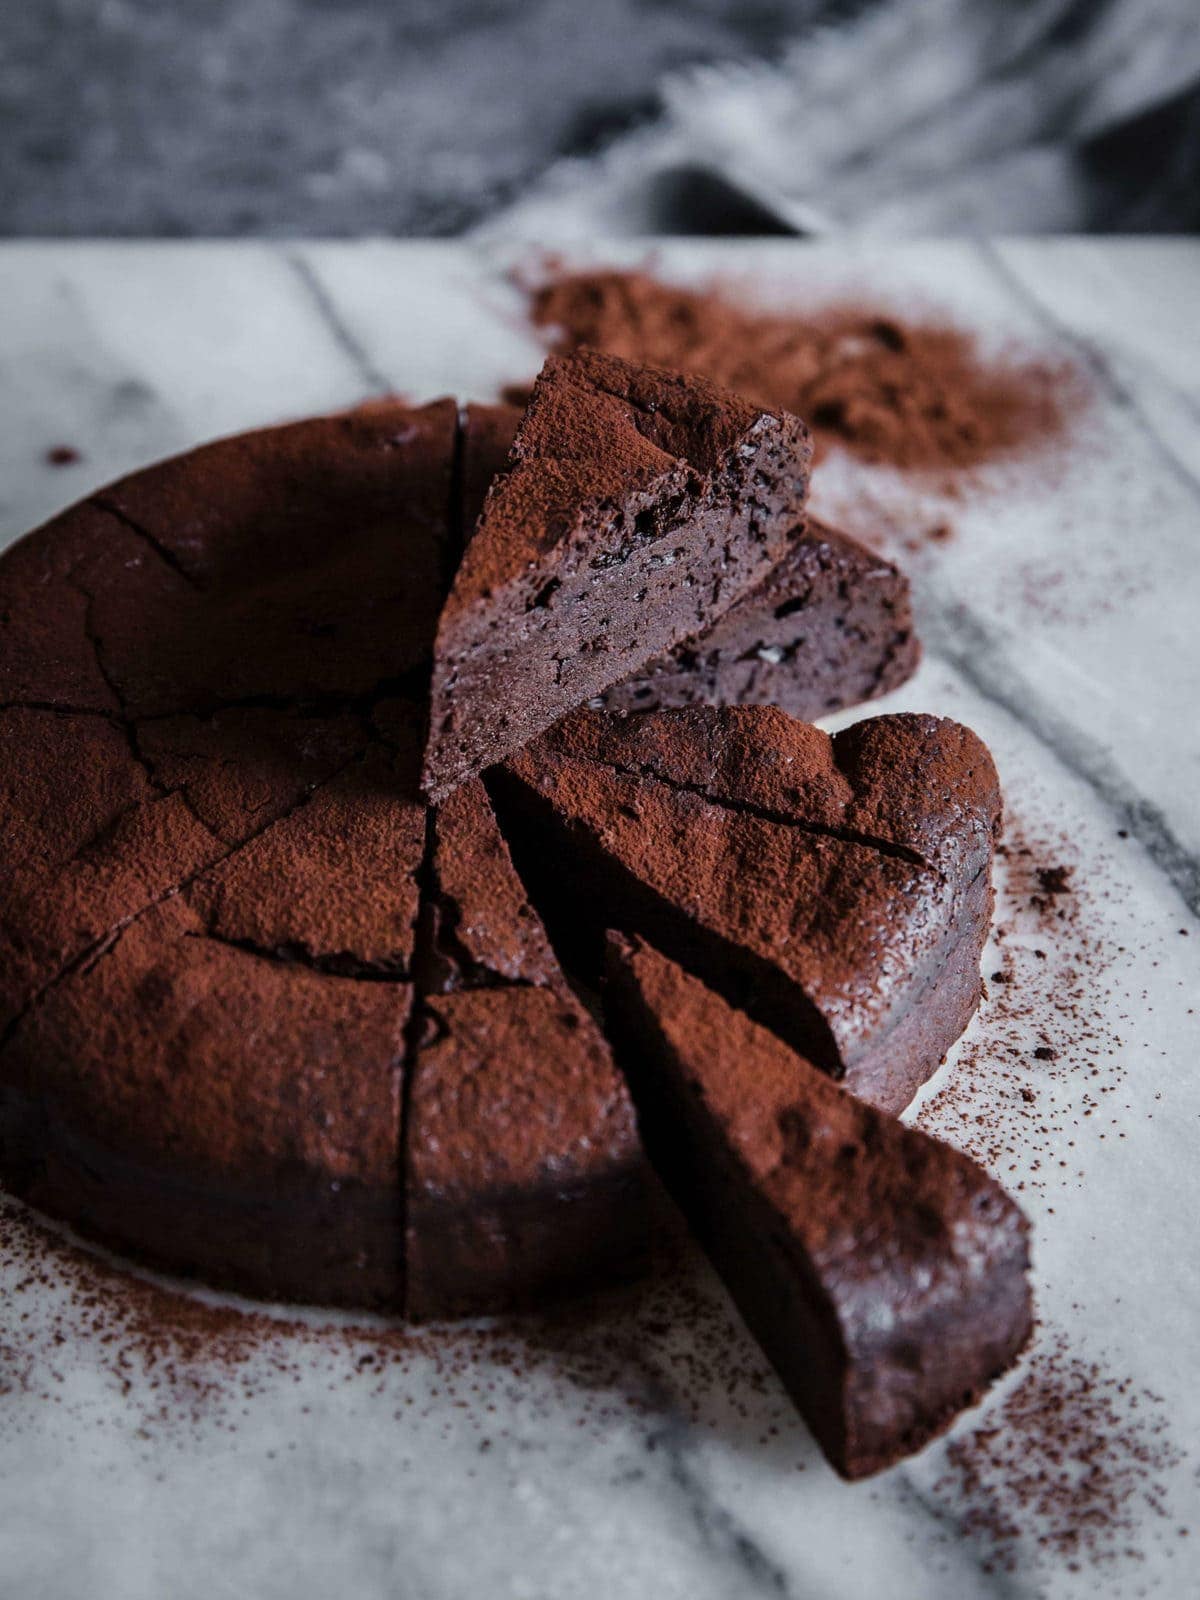 flourless chocolate cake, sliced into 12 slices - with two slices pulled out and dusted with cocoa powder